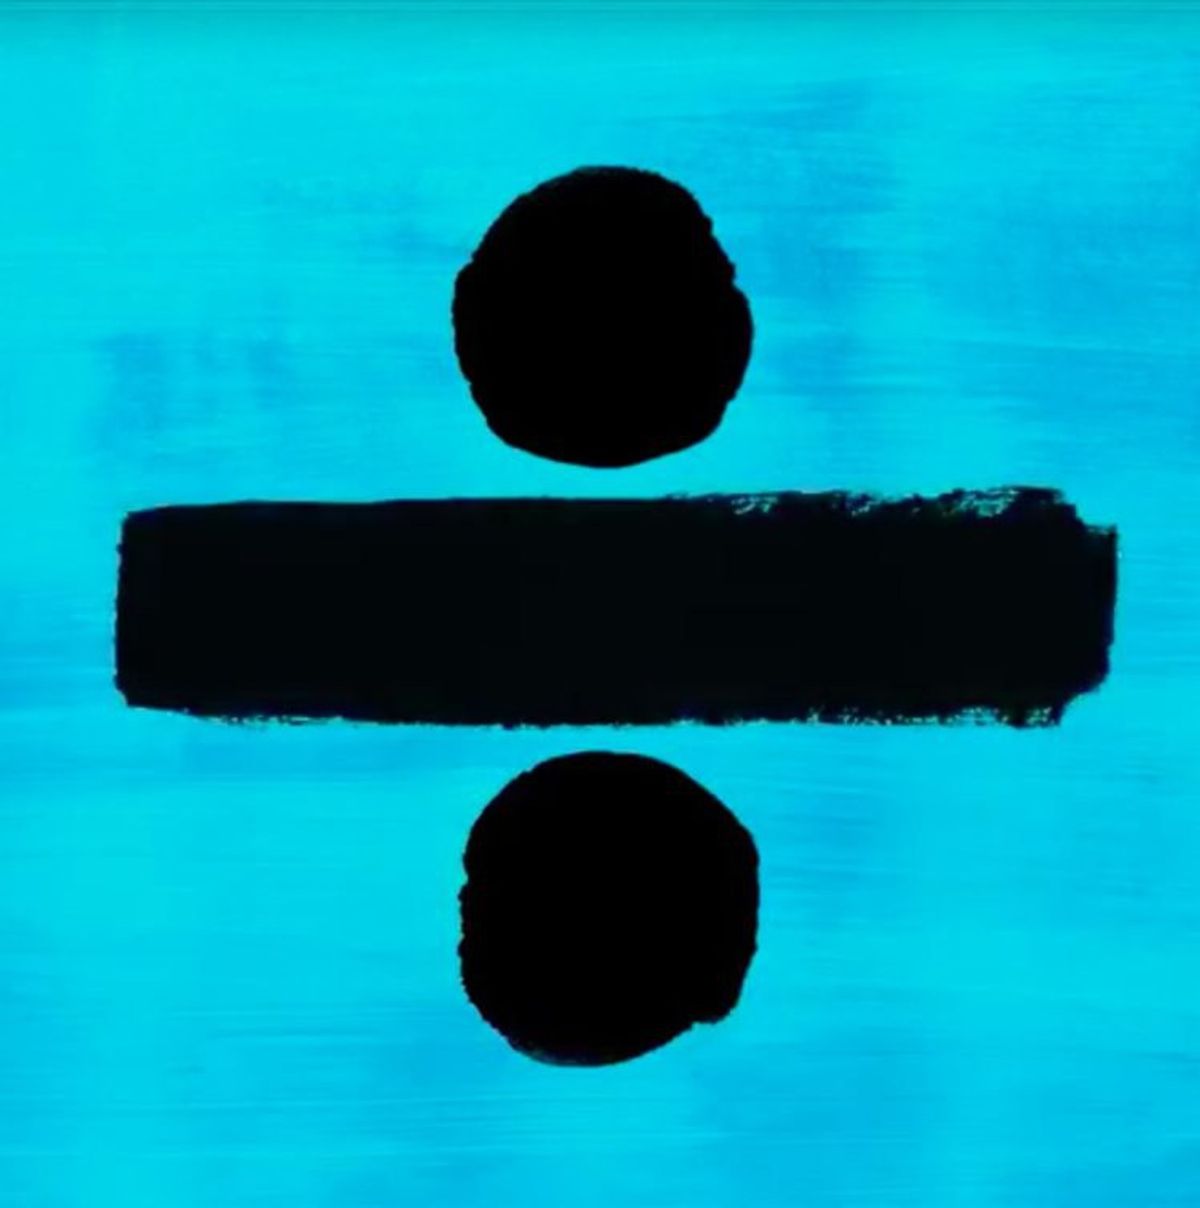 Ed Sheeran Releases Two New Singles, Starting 2017 Off In A Wonderful Way